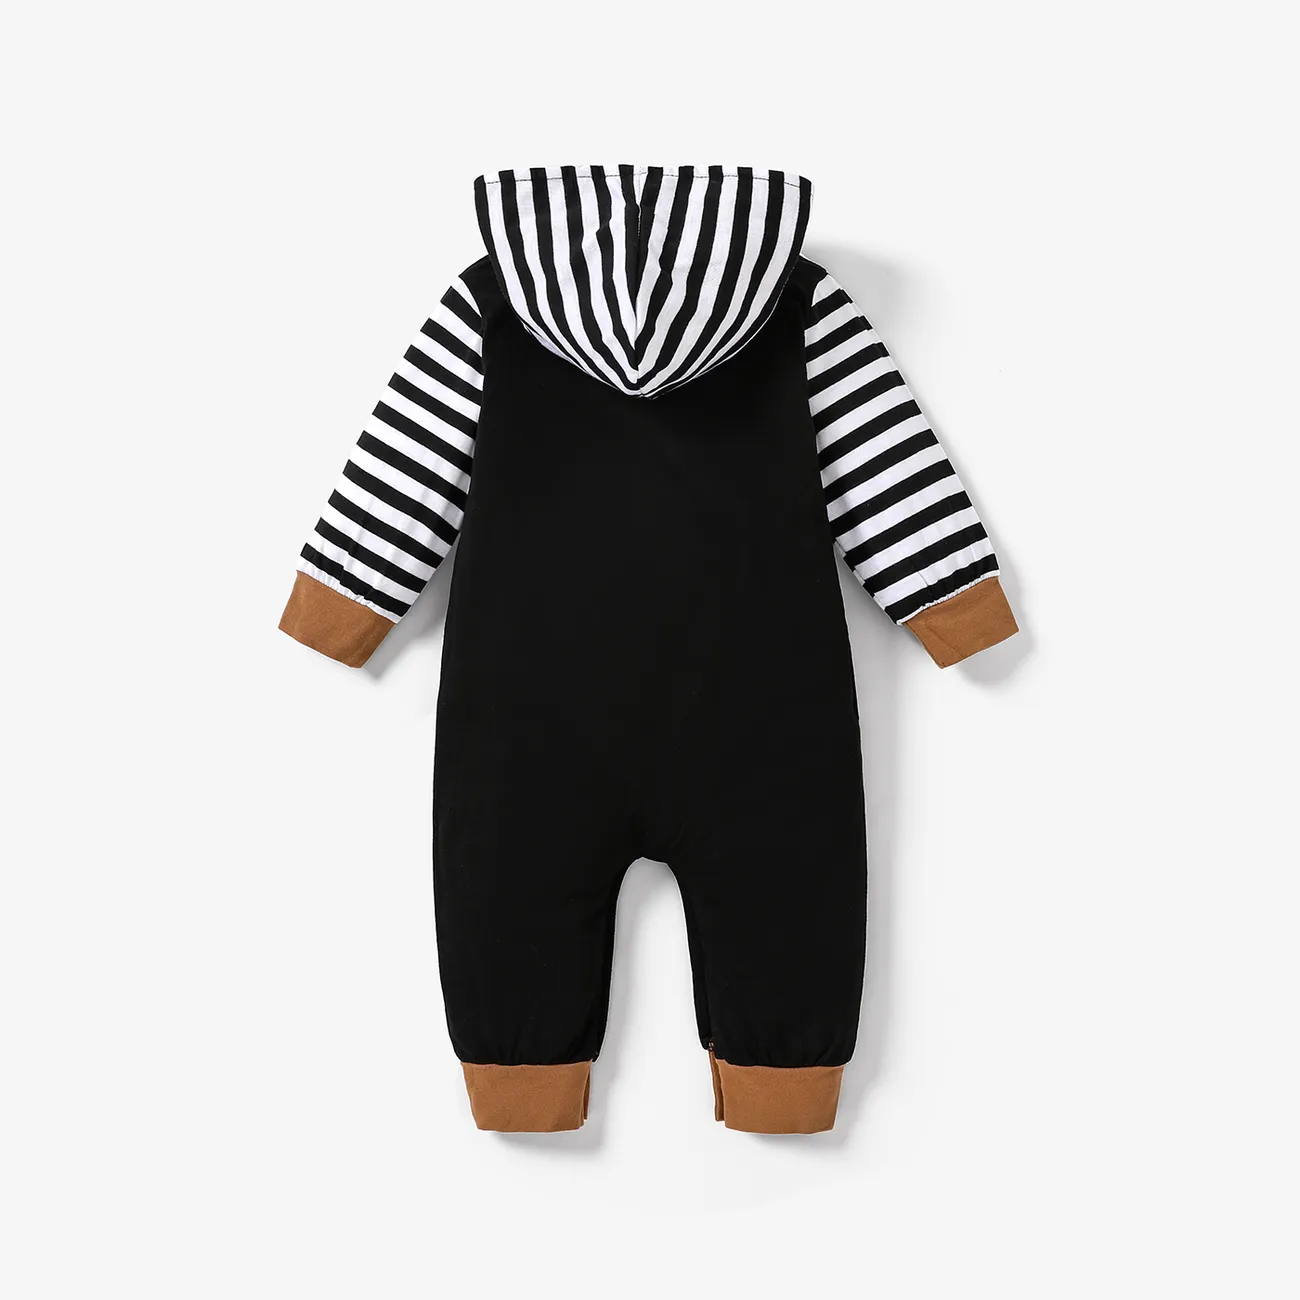 Striped Splicing Long-sleeve Hooded Baby Snap-up Jumpsuit Black big image 1